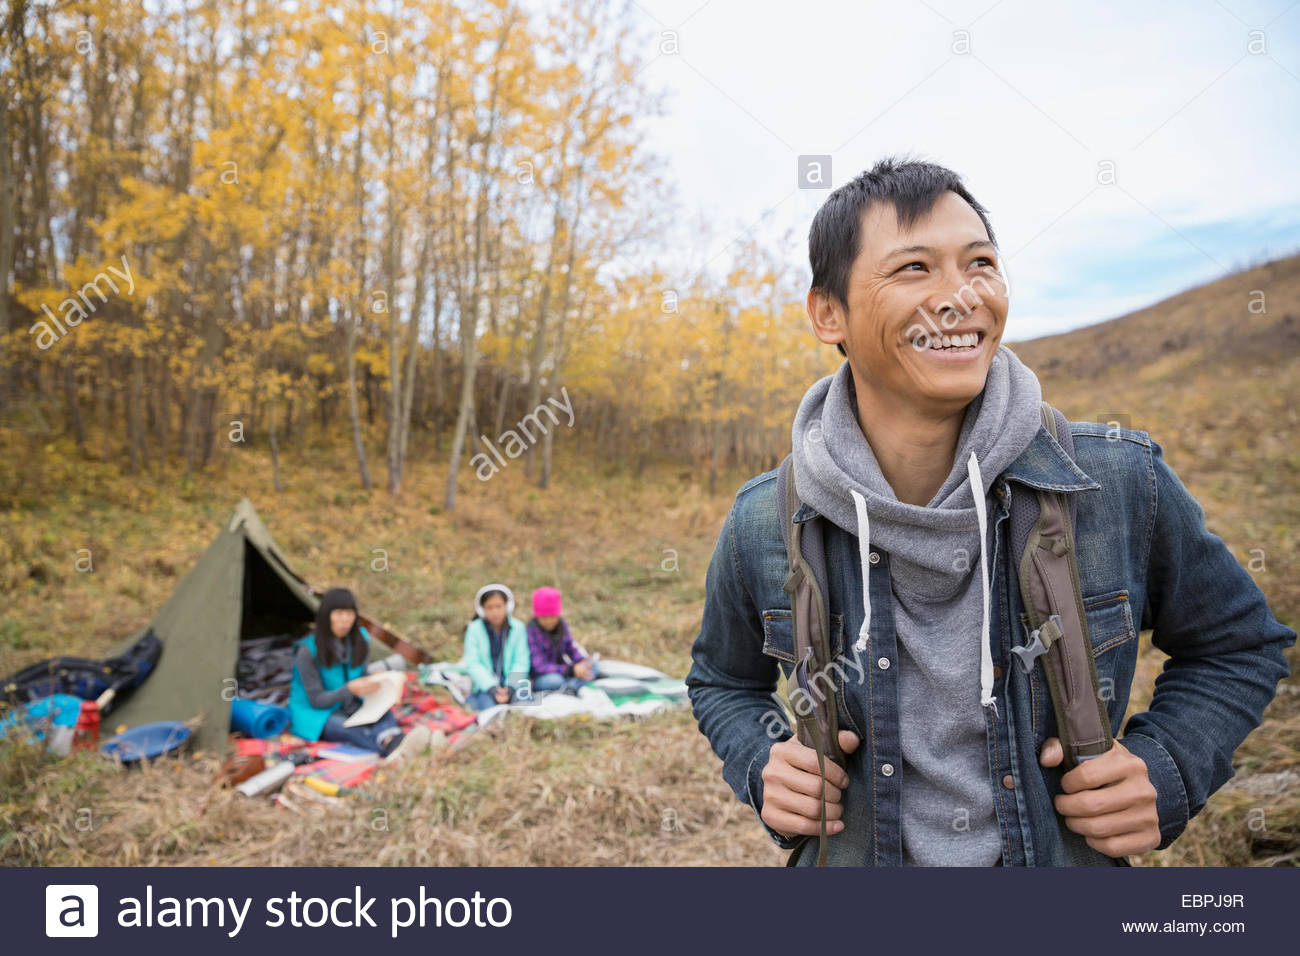 Smiling man camping with family Stock Photo